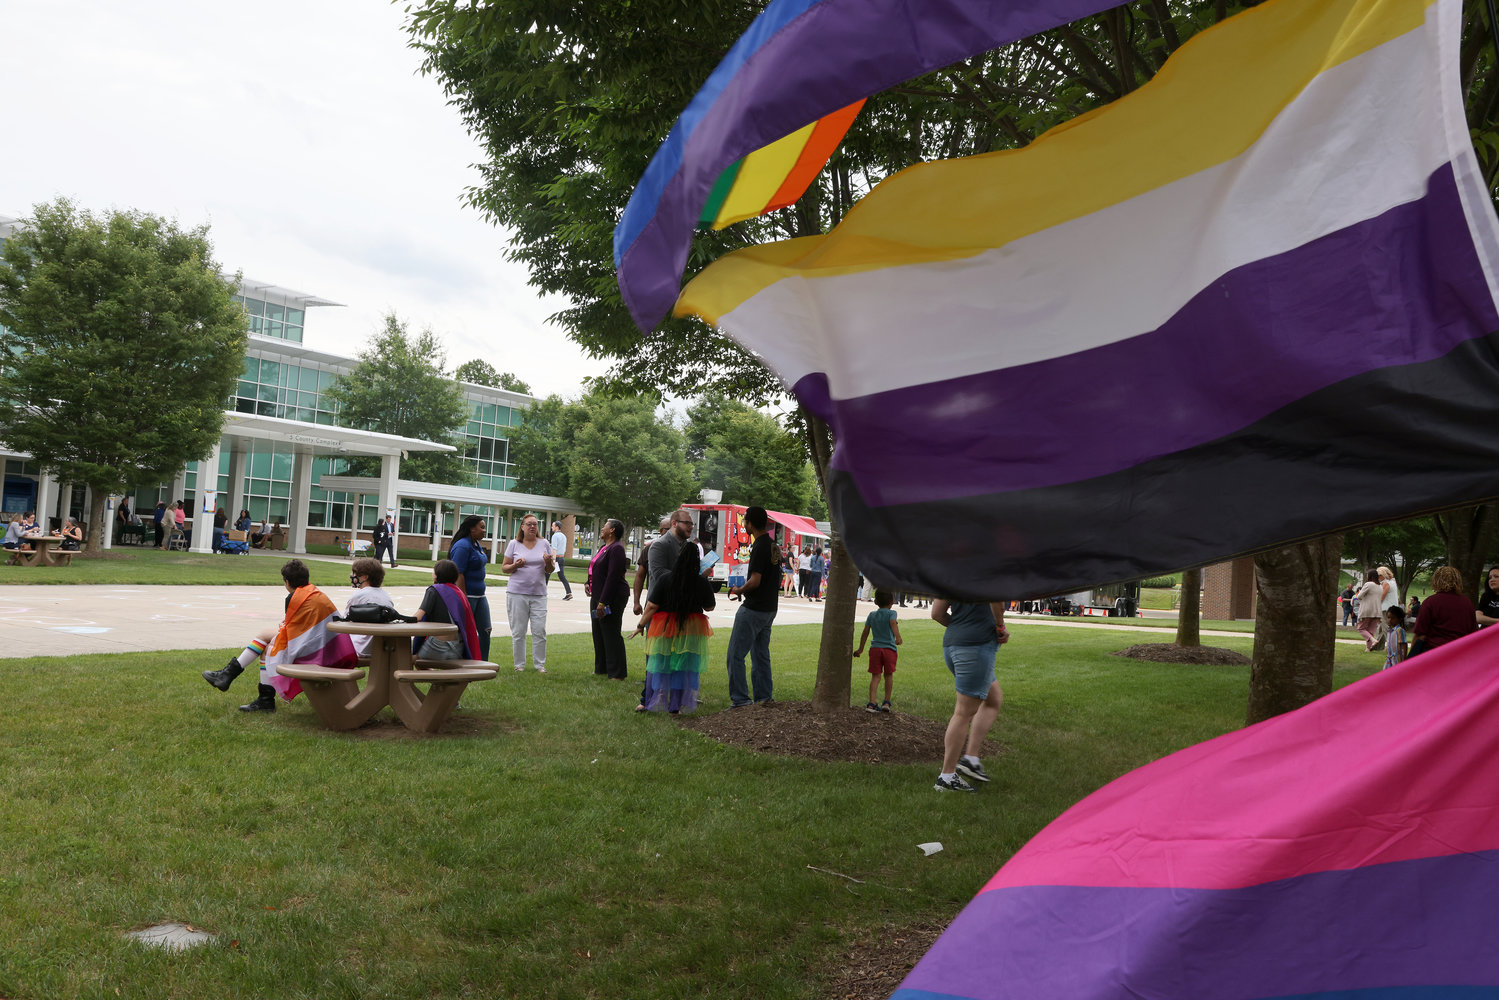 People enjoy the pride event on the lawn at the McCoart Building.